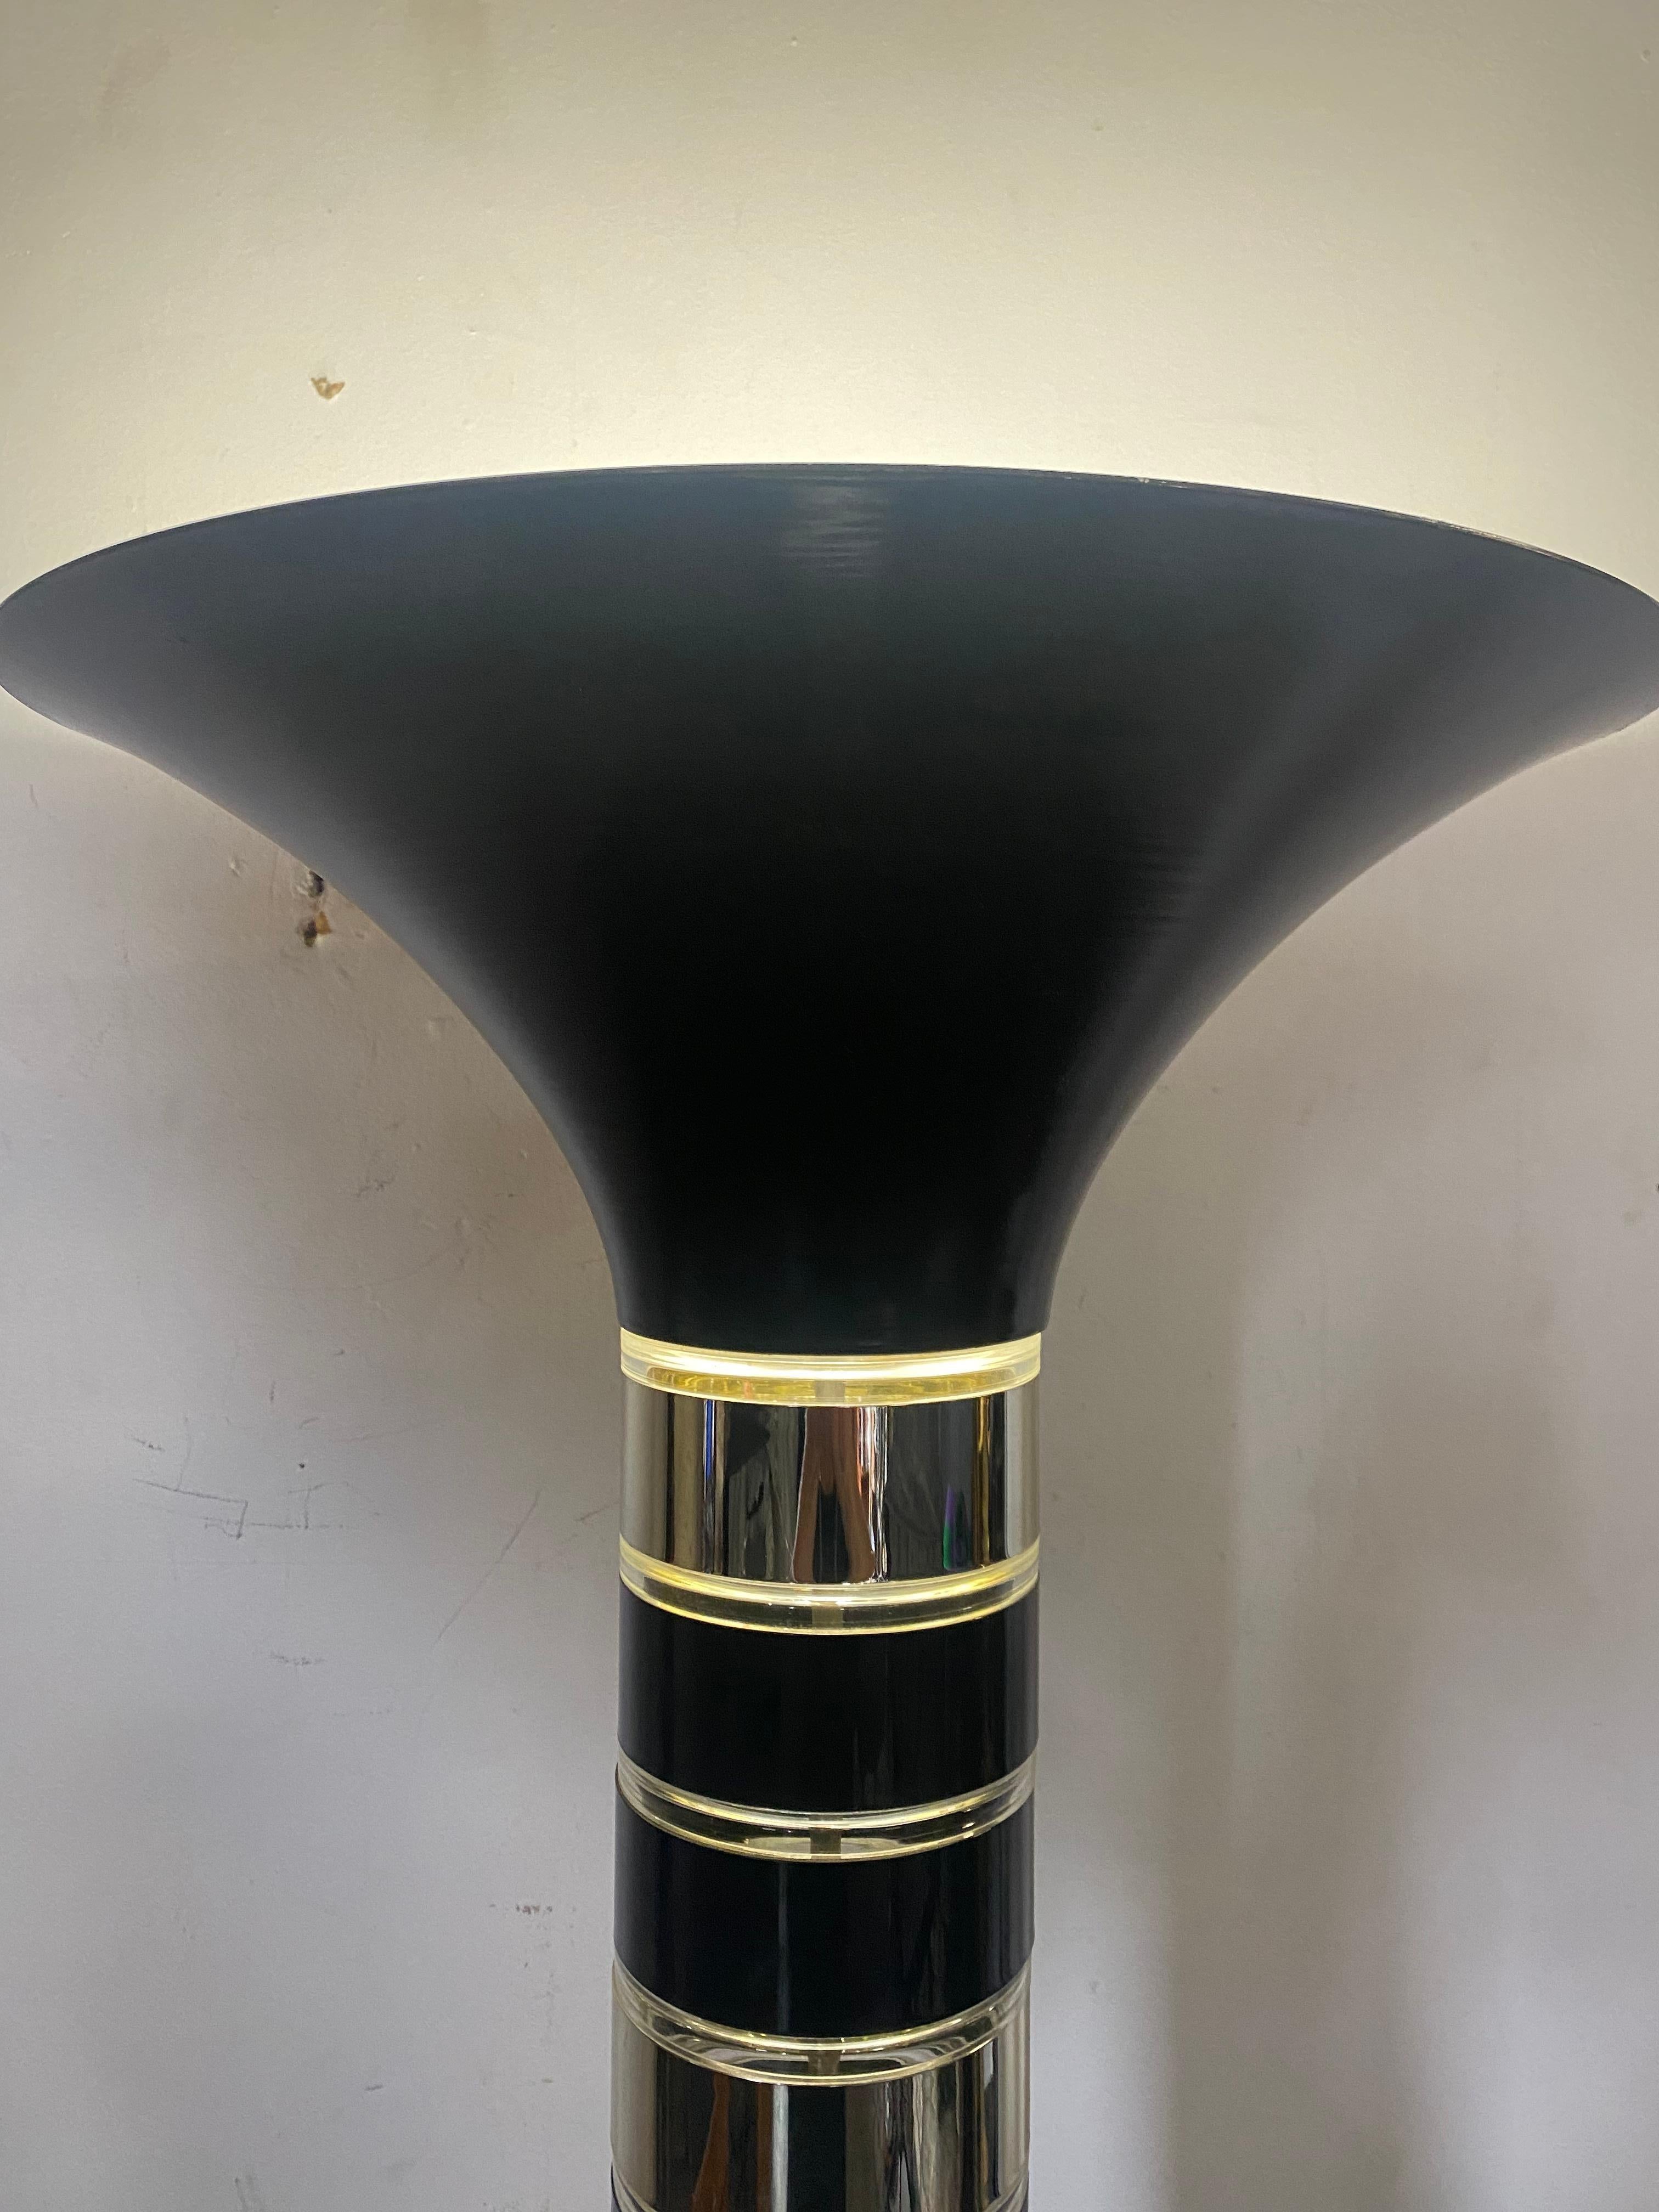 Late 20th Century Post Modernist Lucite Disk Torchiere Floor Lamp by Optique